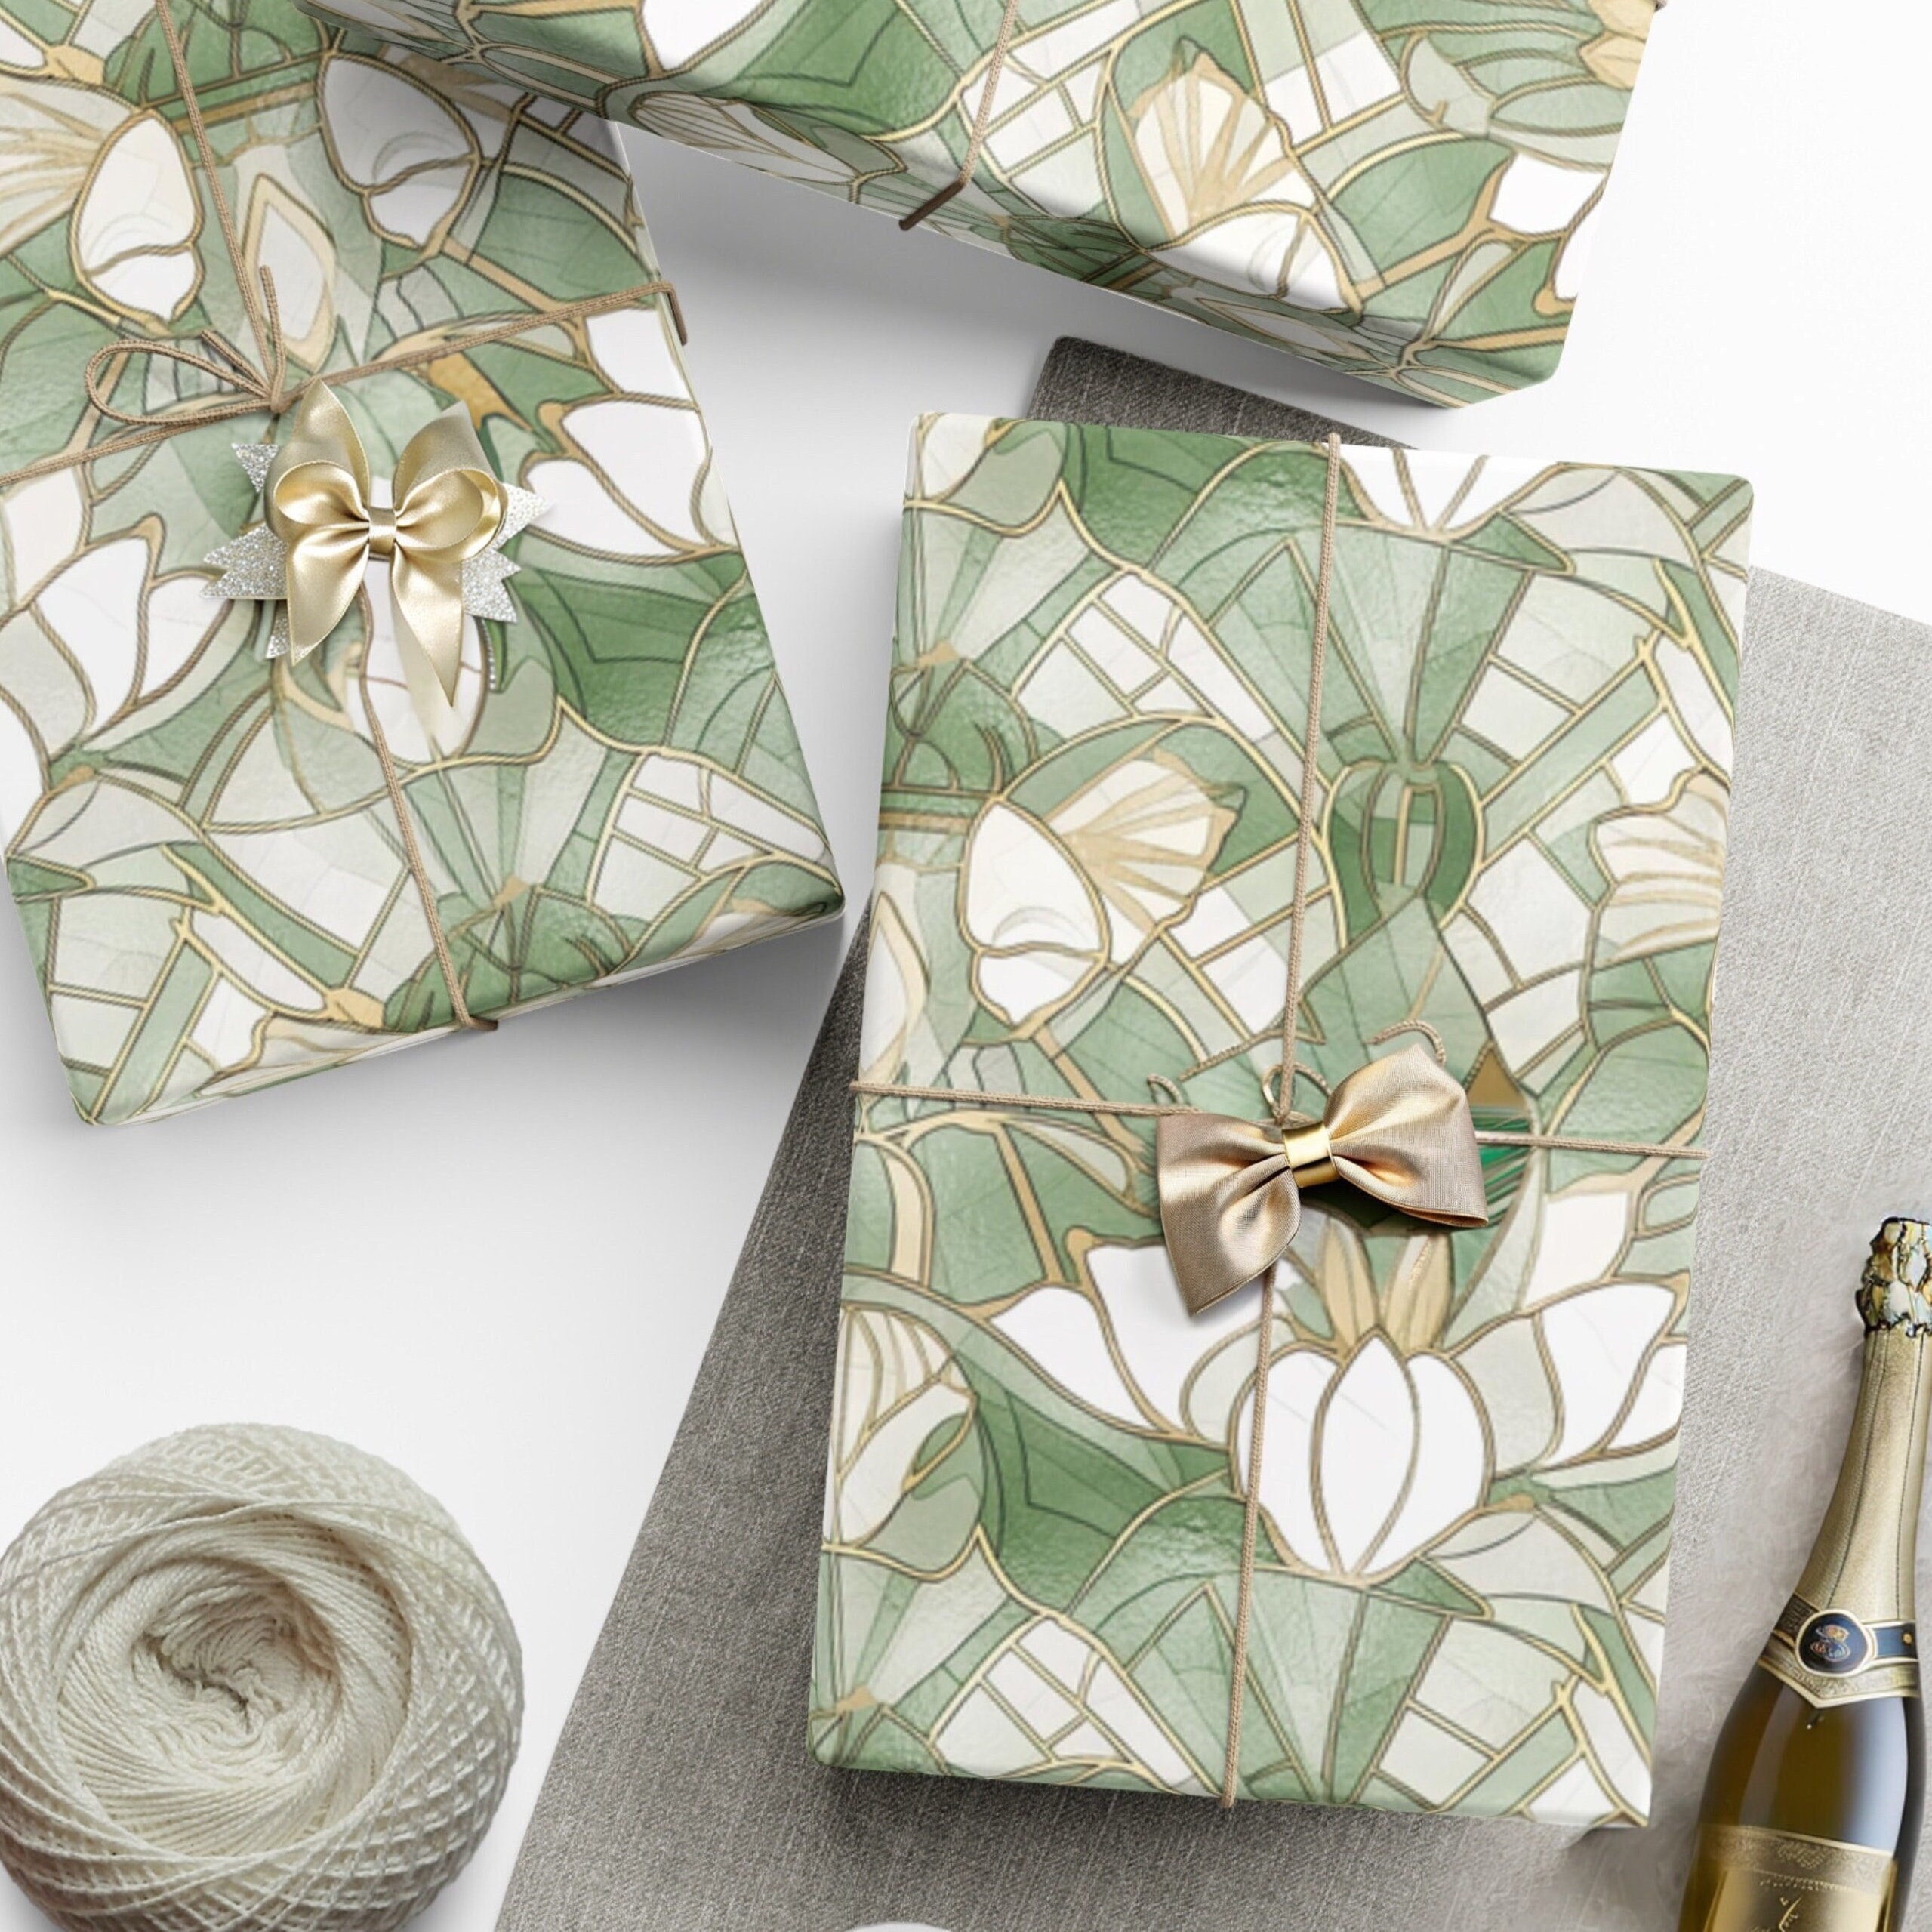 Sage Green Wrapping Paper Roll - Mosaic Stained Glass Eco Friendly Wedding  Wrapping Paper Elegant White Lily Flower Gold Gift Wrap Roll